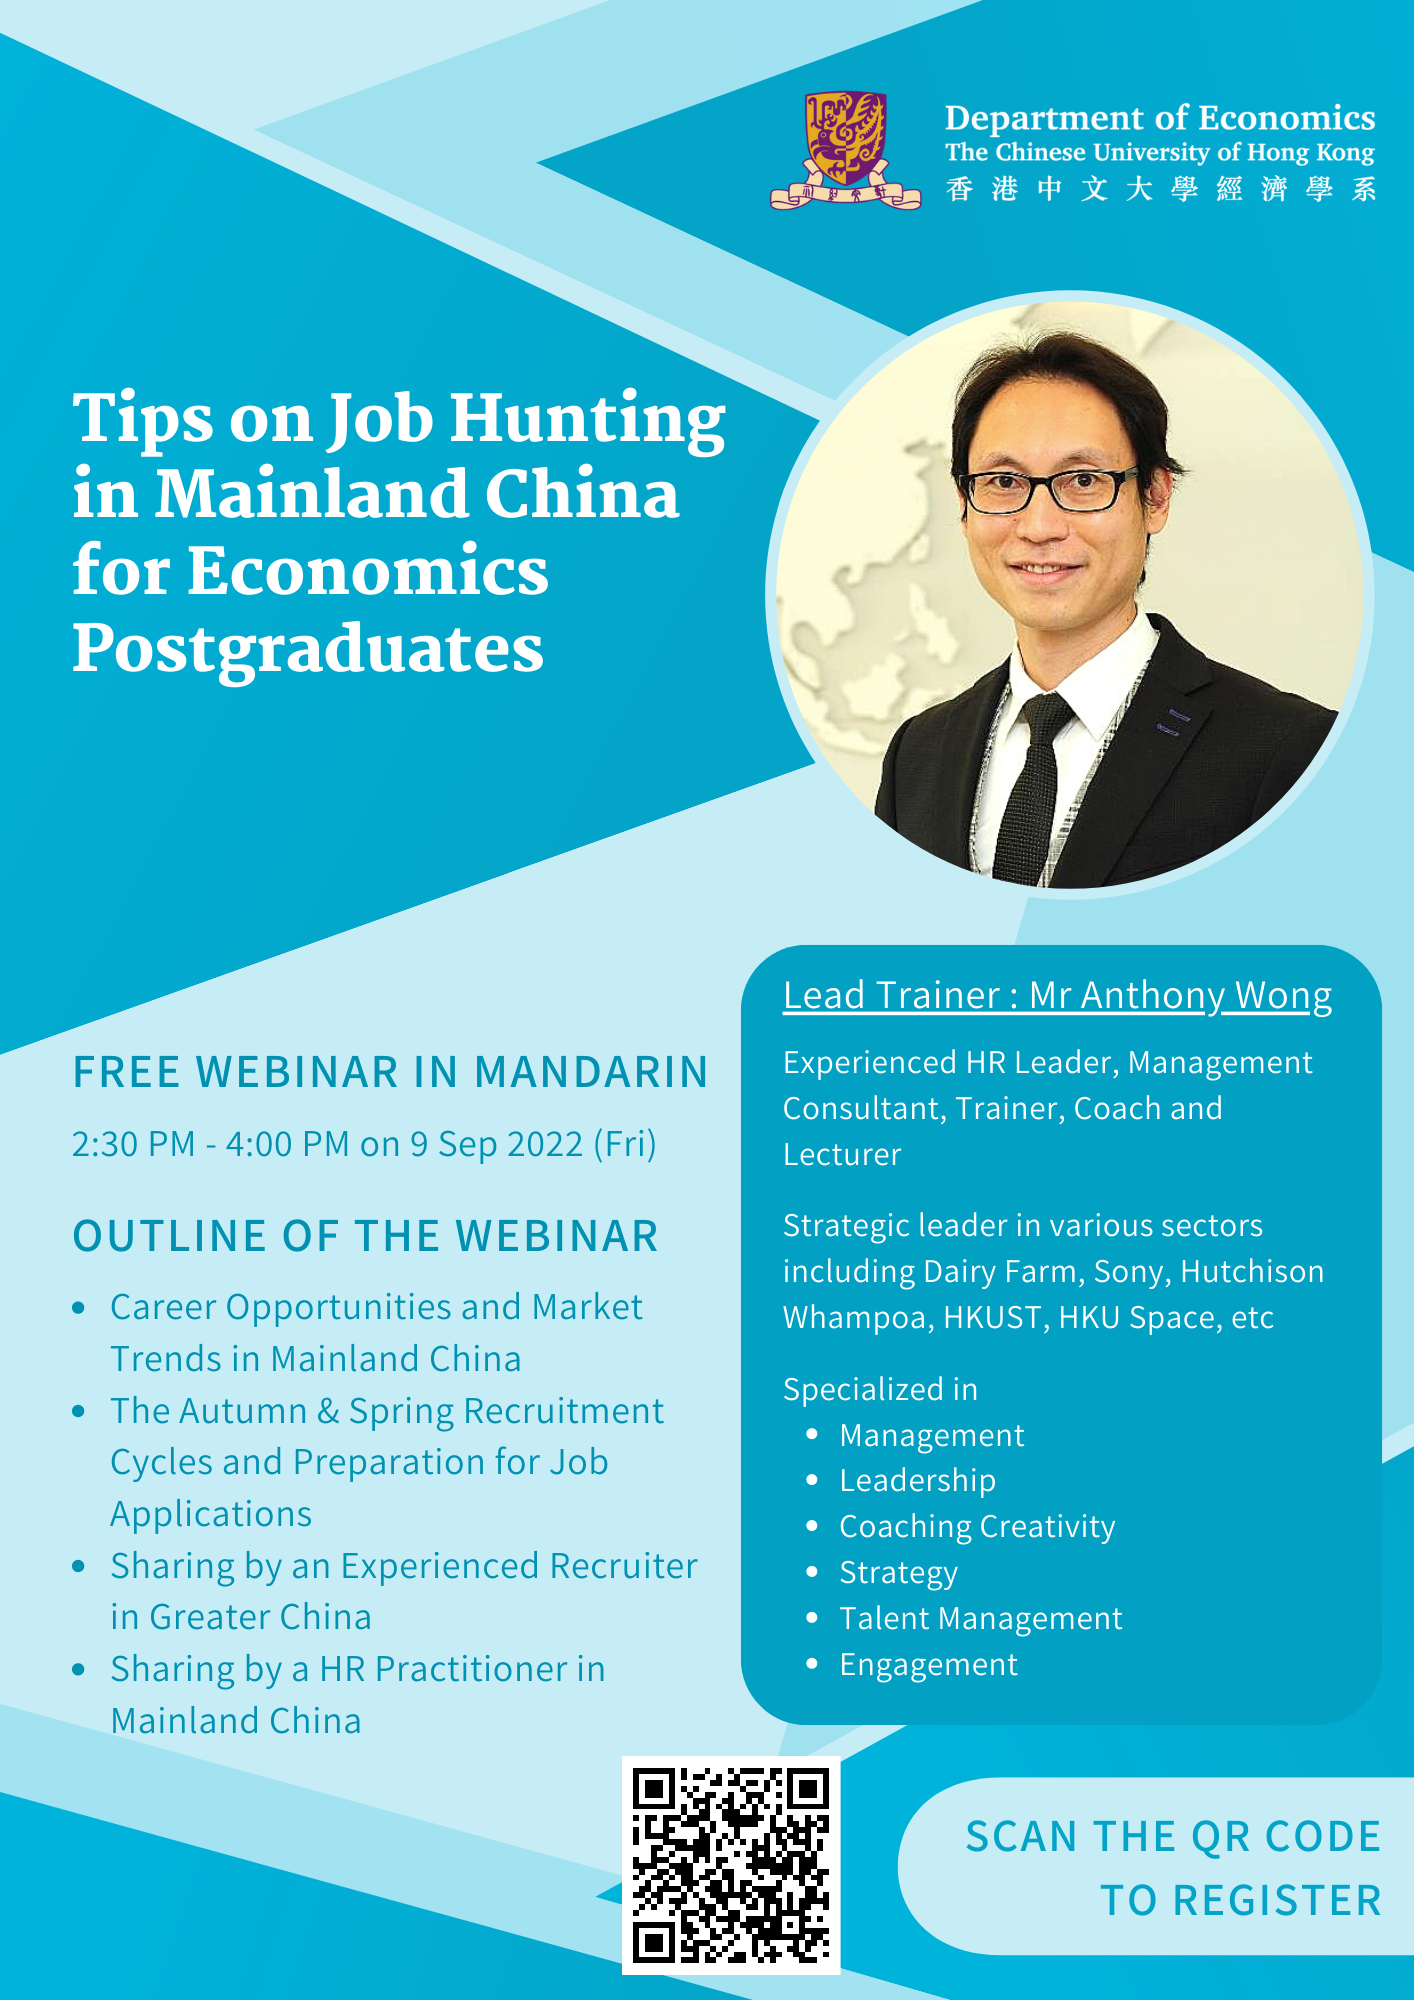 Tips on Mainland China for Postgraduate Students in Economics 9 Sep 2022